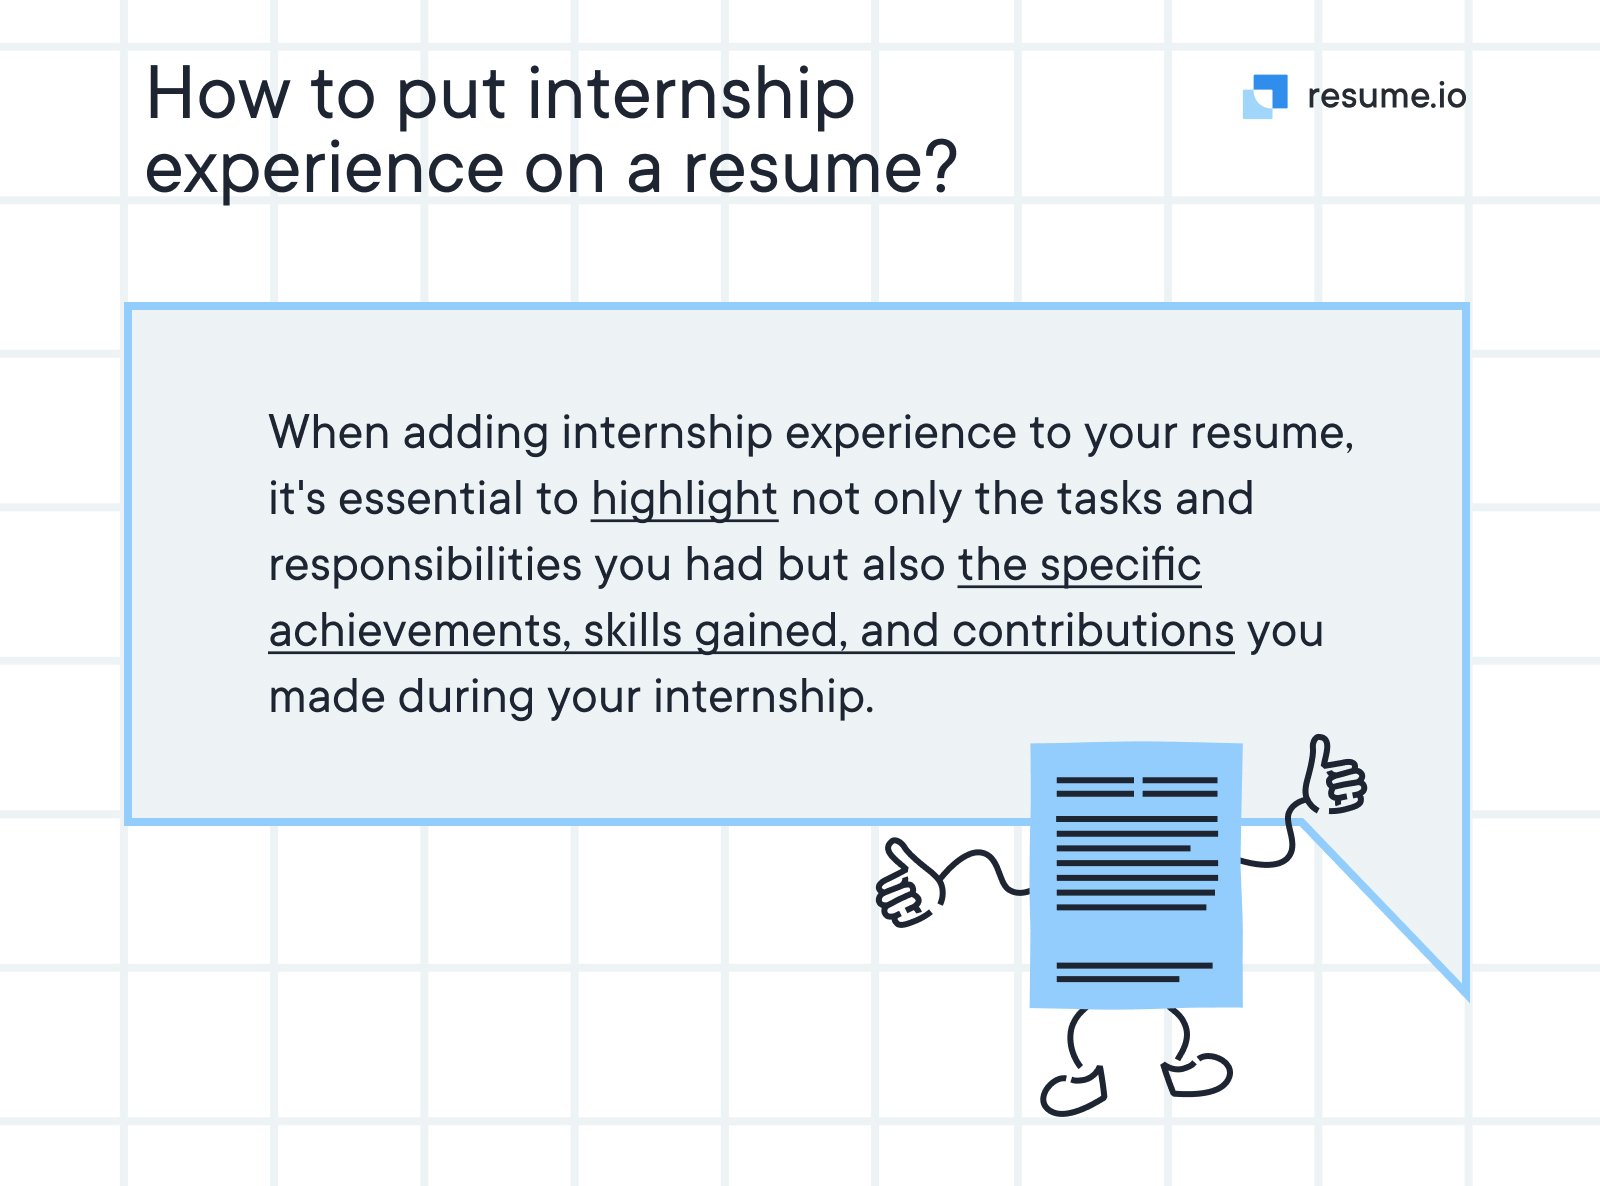 How to put internship experience on a resume?